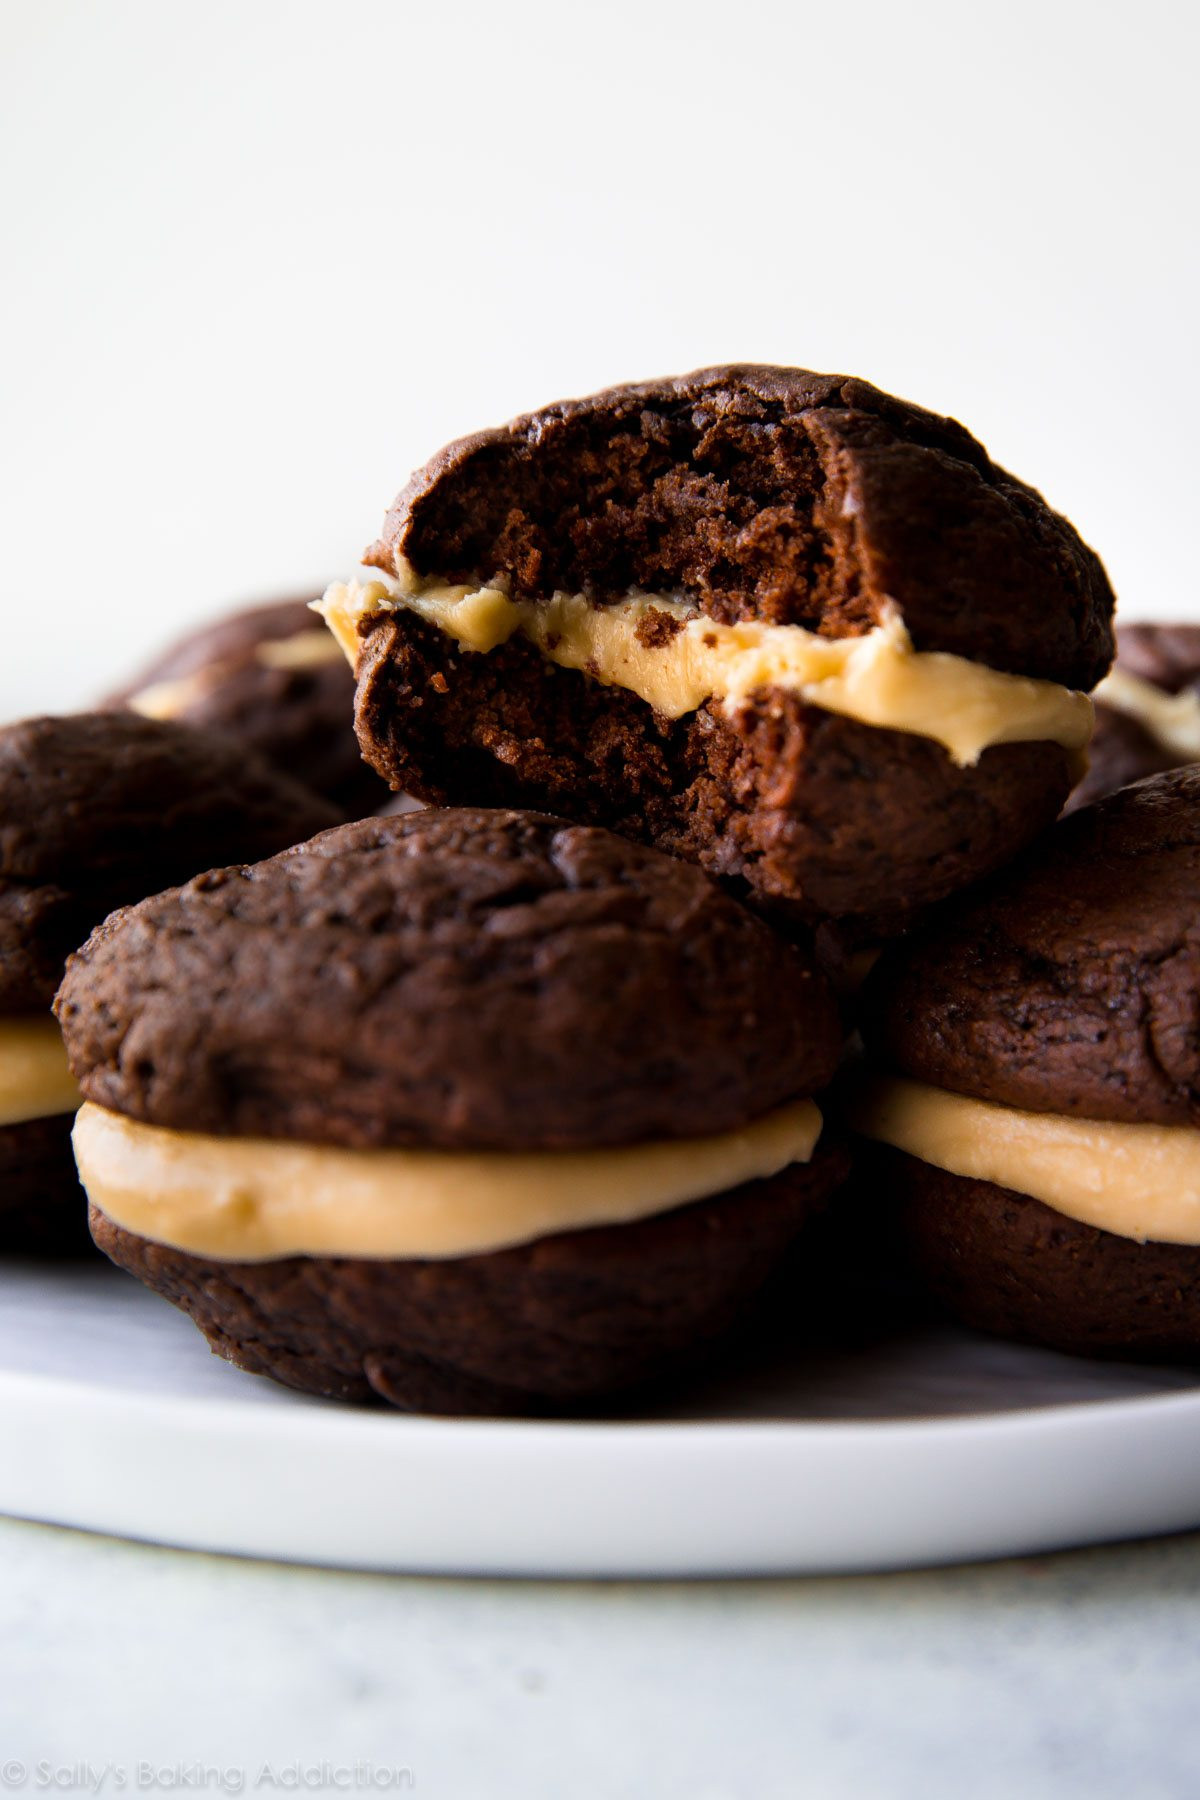 Whoopie Pie Recipes
 Chocolate Whoopie Pies with Salted Caramel Frosting